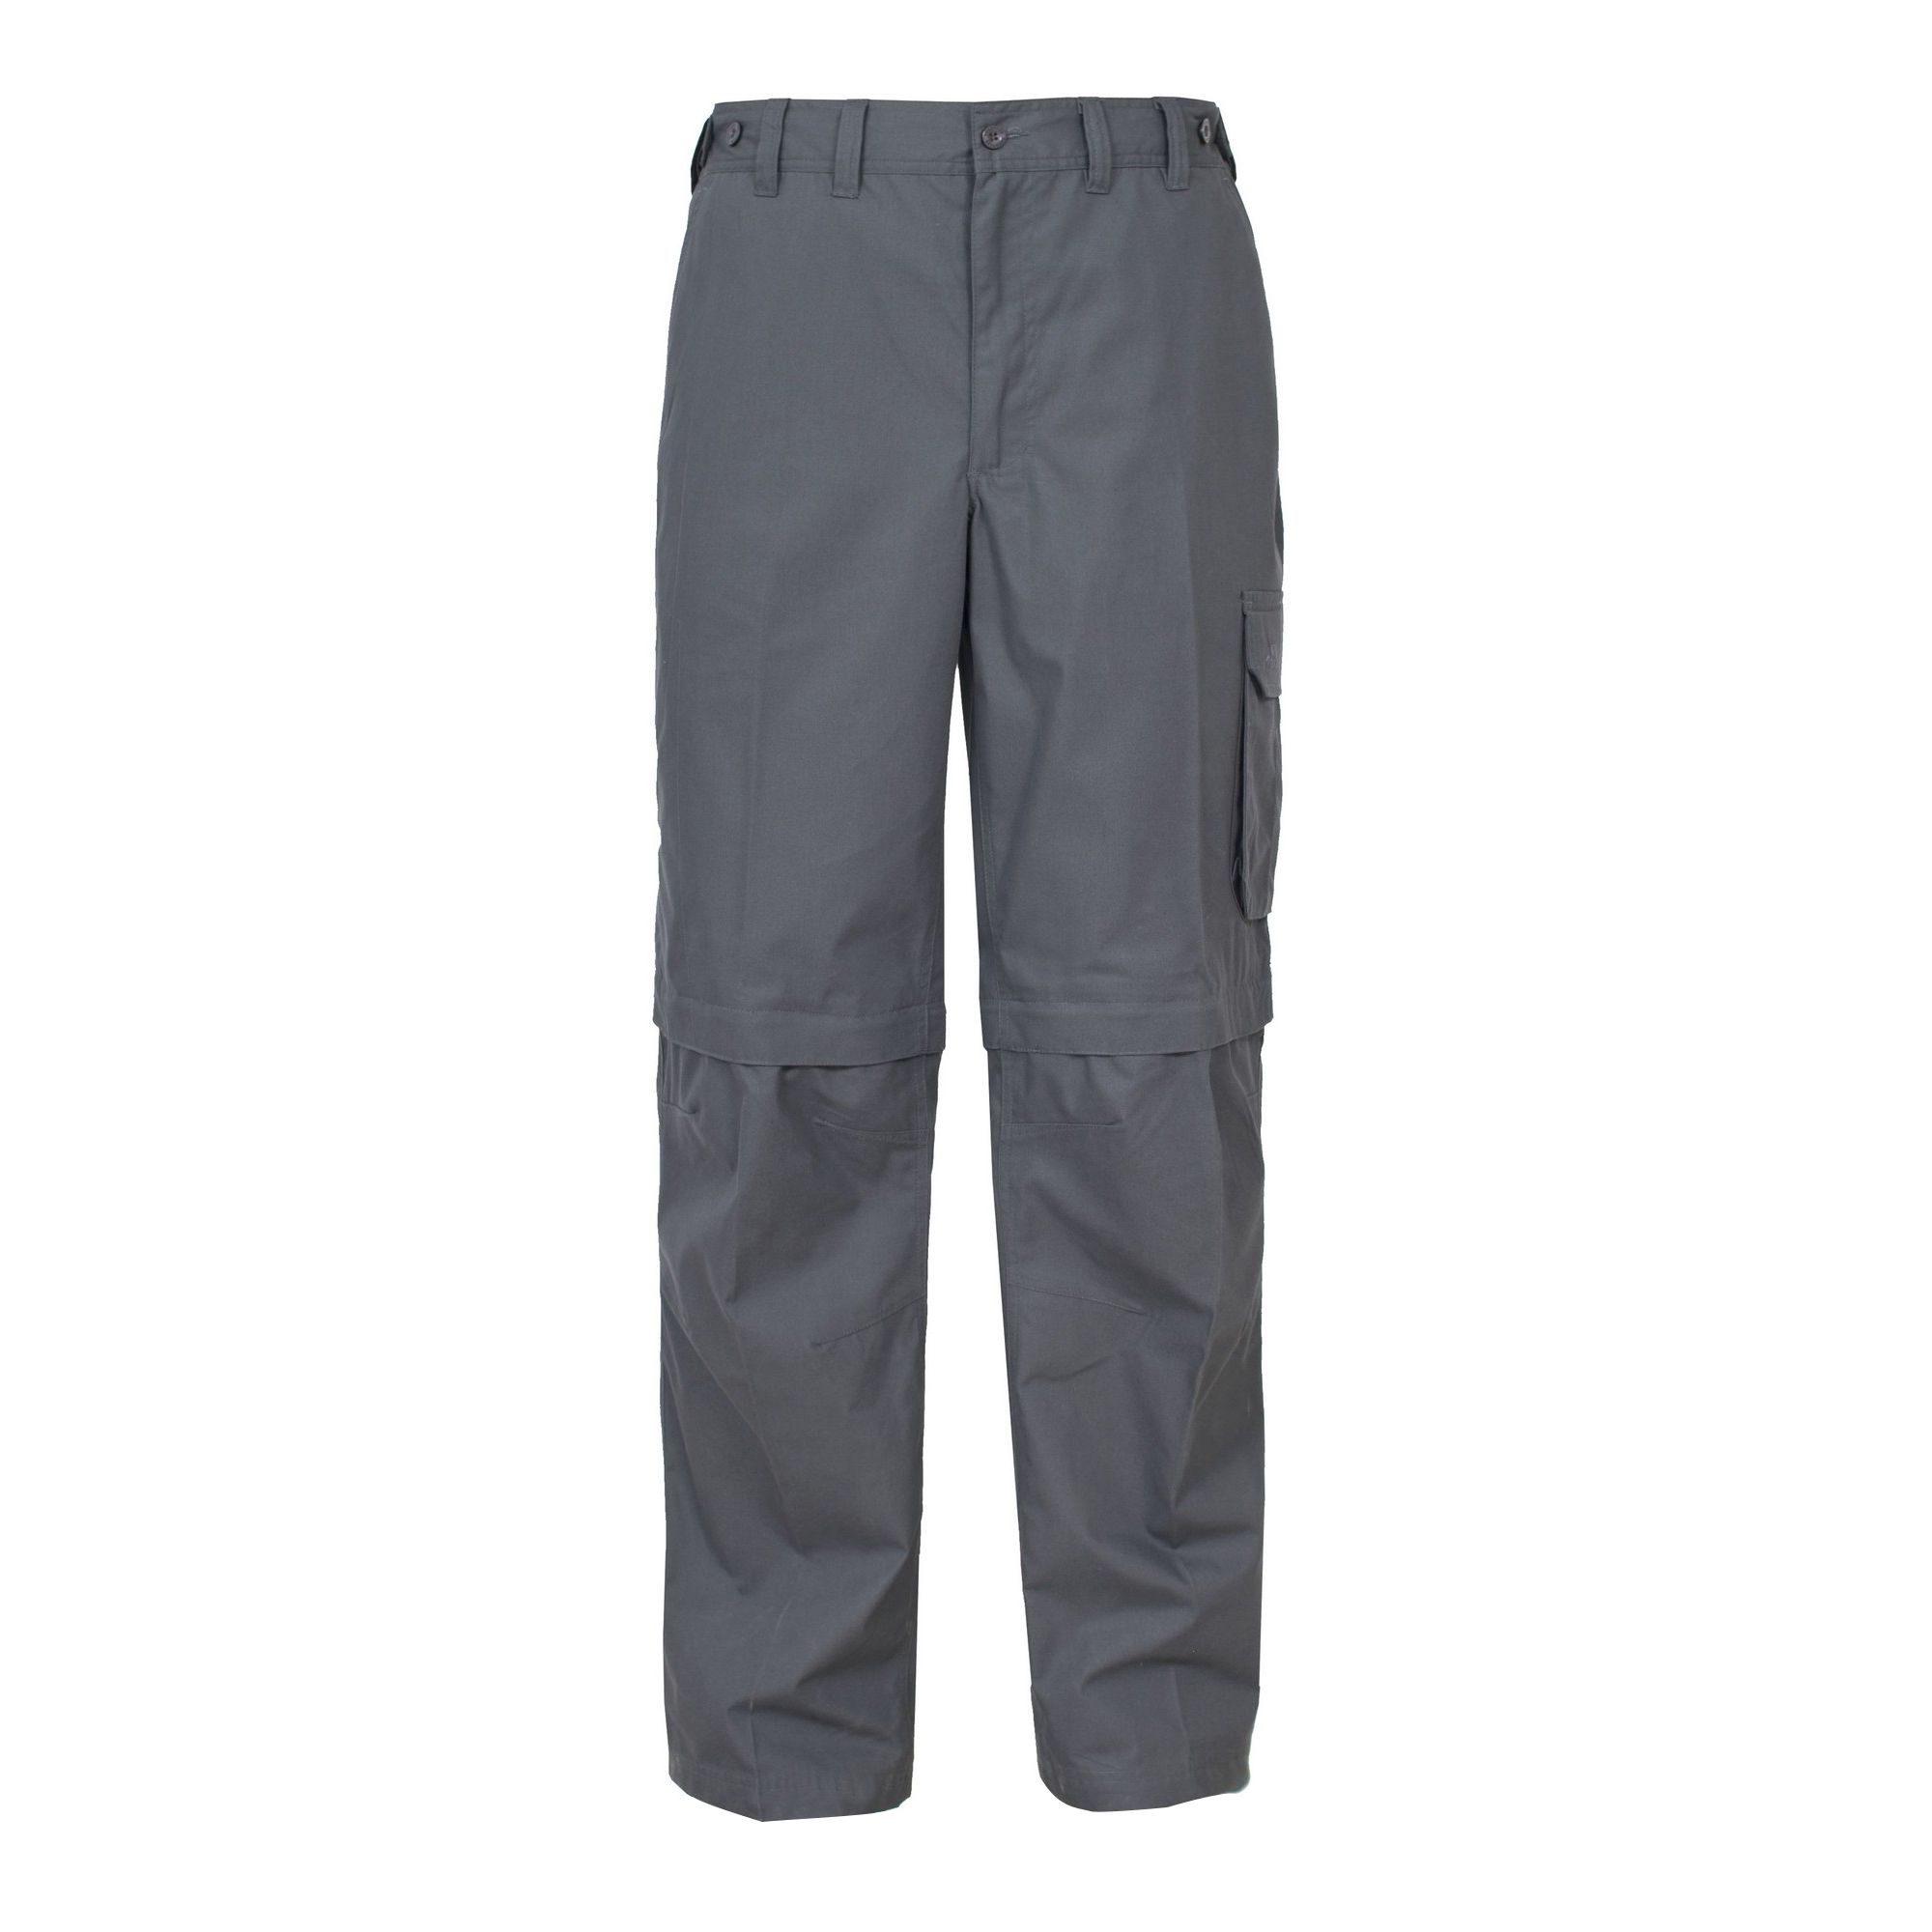 Mens convertible cargo trousers. Durable water repellent finish. UPF40+ protective fabric. Converts into shorts with zip off legs from the knee, making them ideal for outdoor walking. Moisture wicking build. Quick dry fabric. 2 zipped pockets, 1 concealed zipped pocket, 2 side pockets and 3 bellow patch pockets. Elasticated back panel with side adjusters. Articulated knee darts for added mobility. 65% Polyester, 35% Cotton.